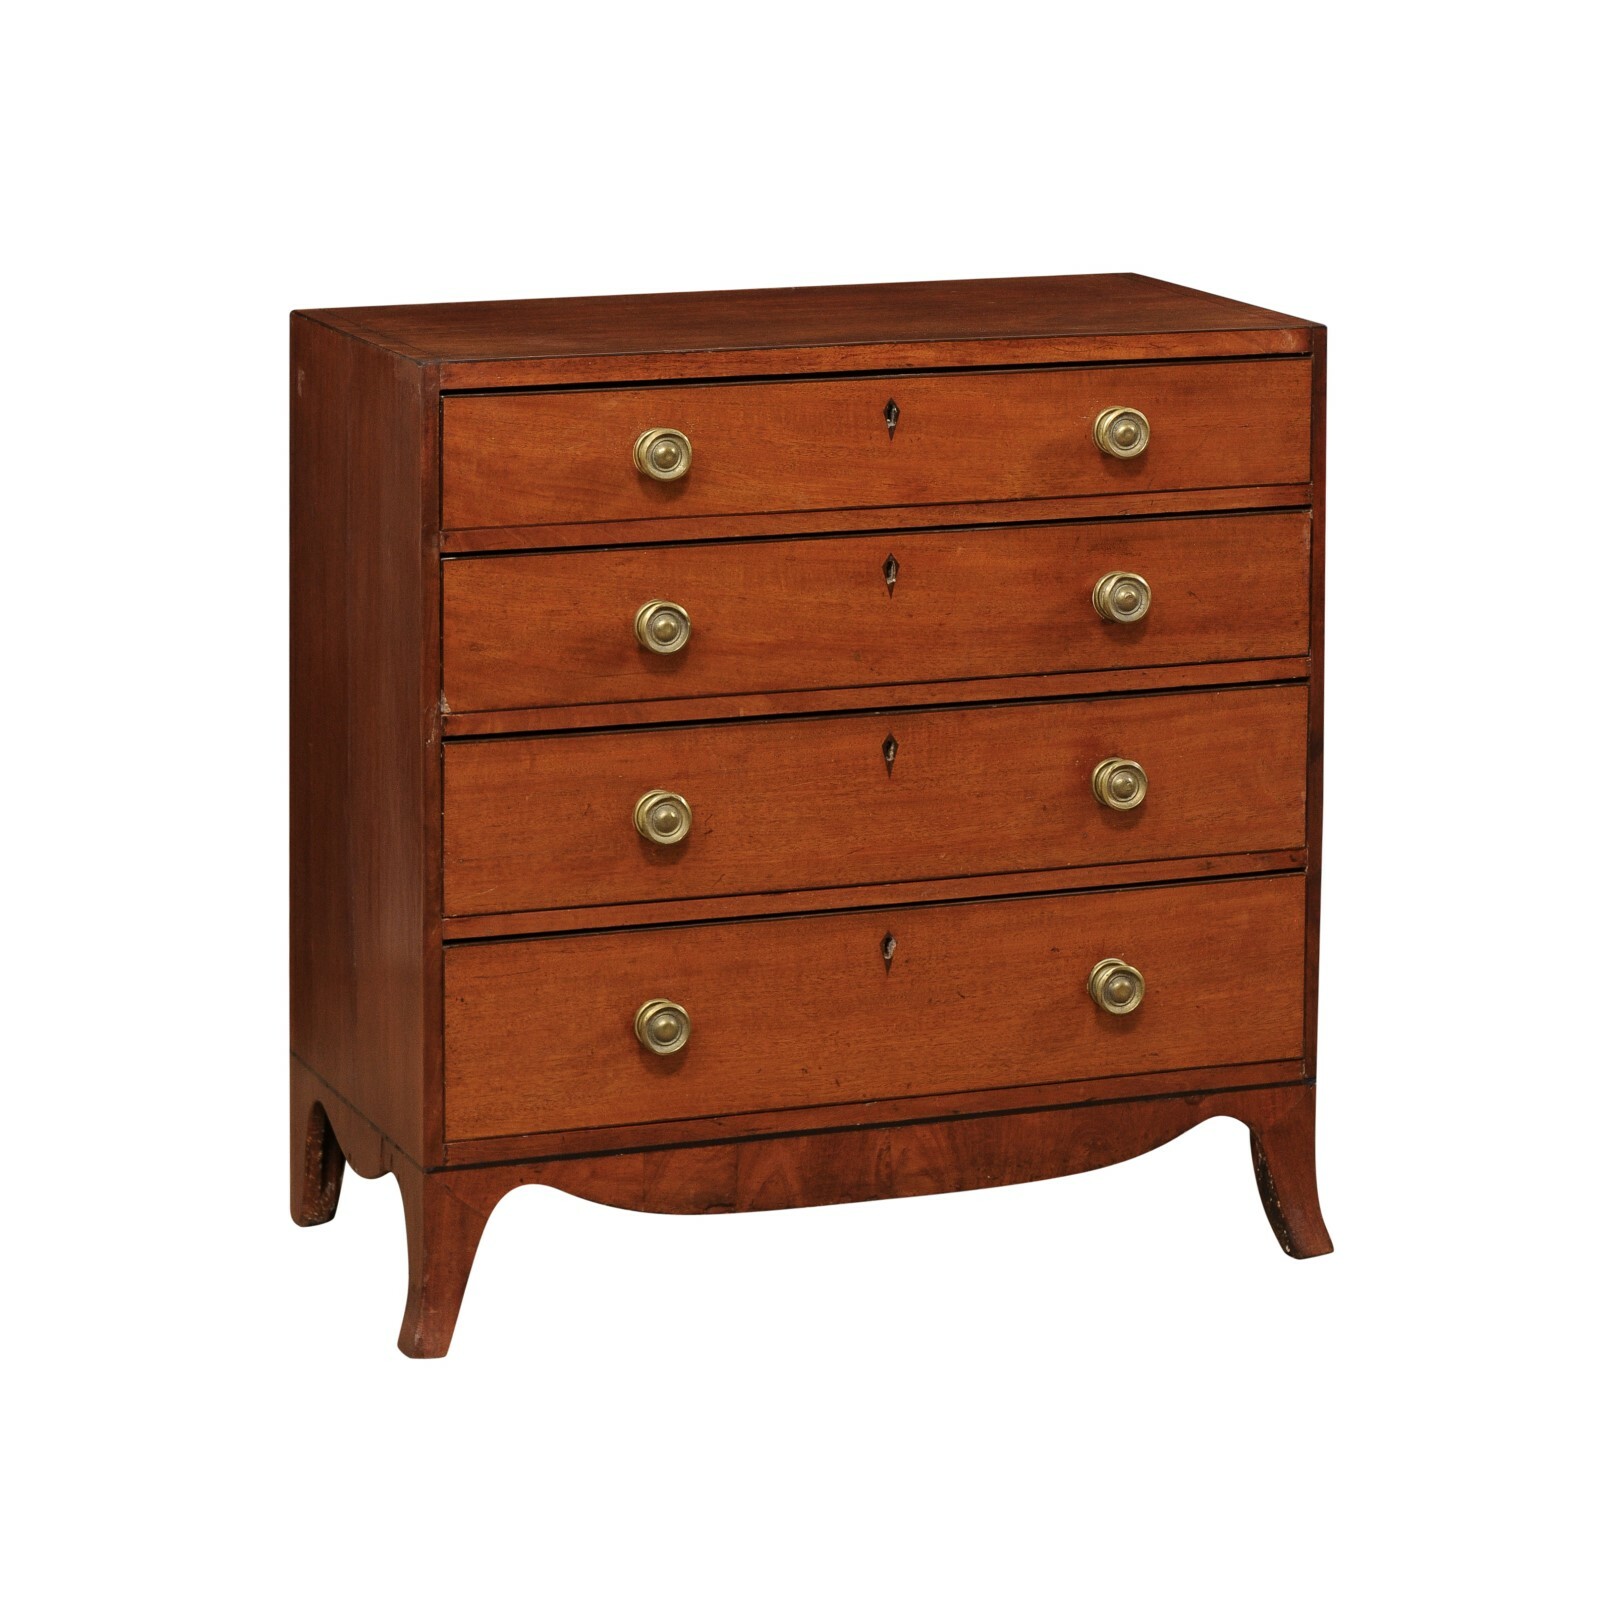 19th C. English Wooden Chest of 4 Drawers